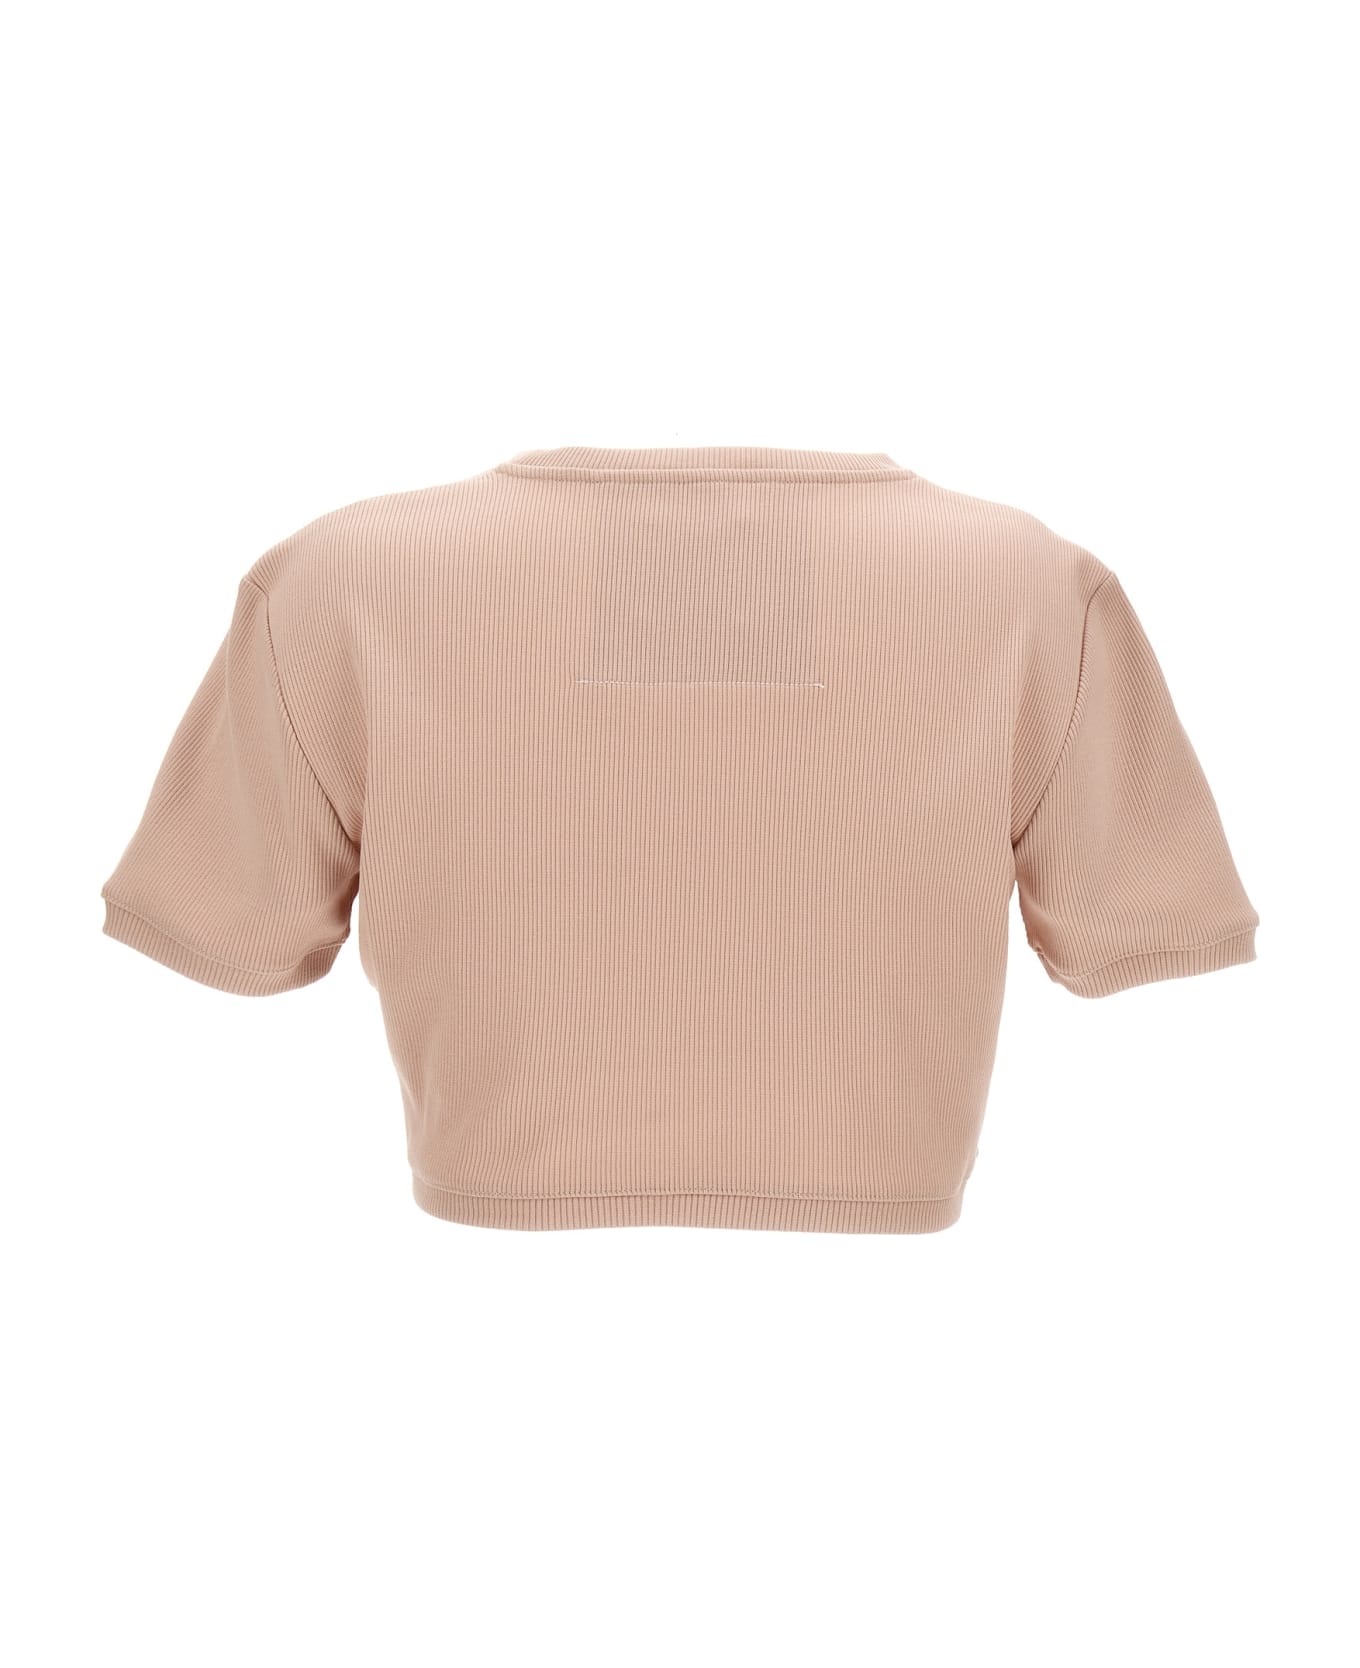 Givenchy Logo Plaque T-shirt - Pink Tシャツ